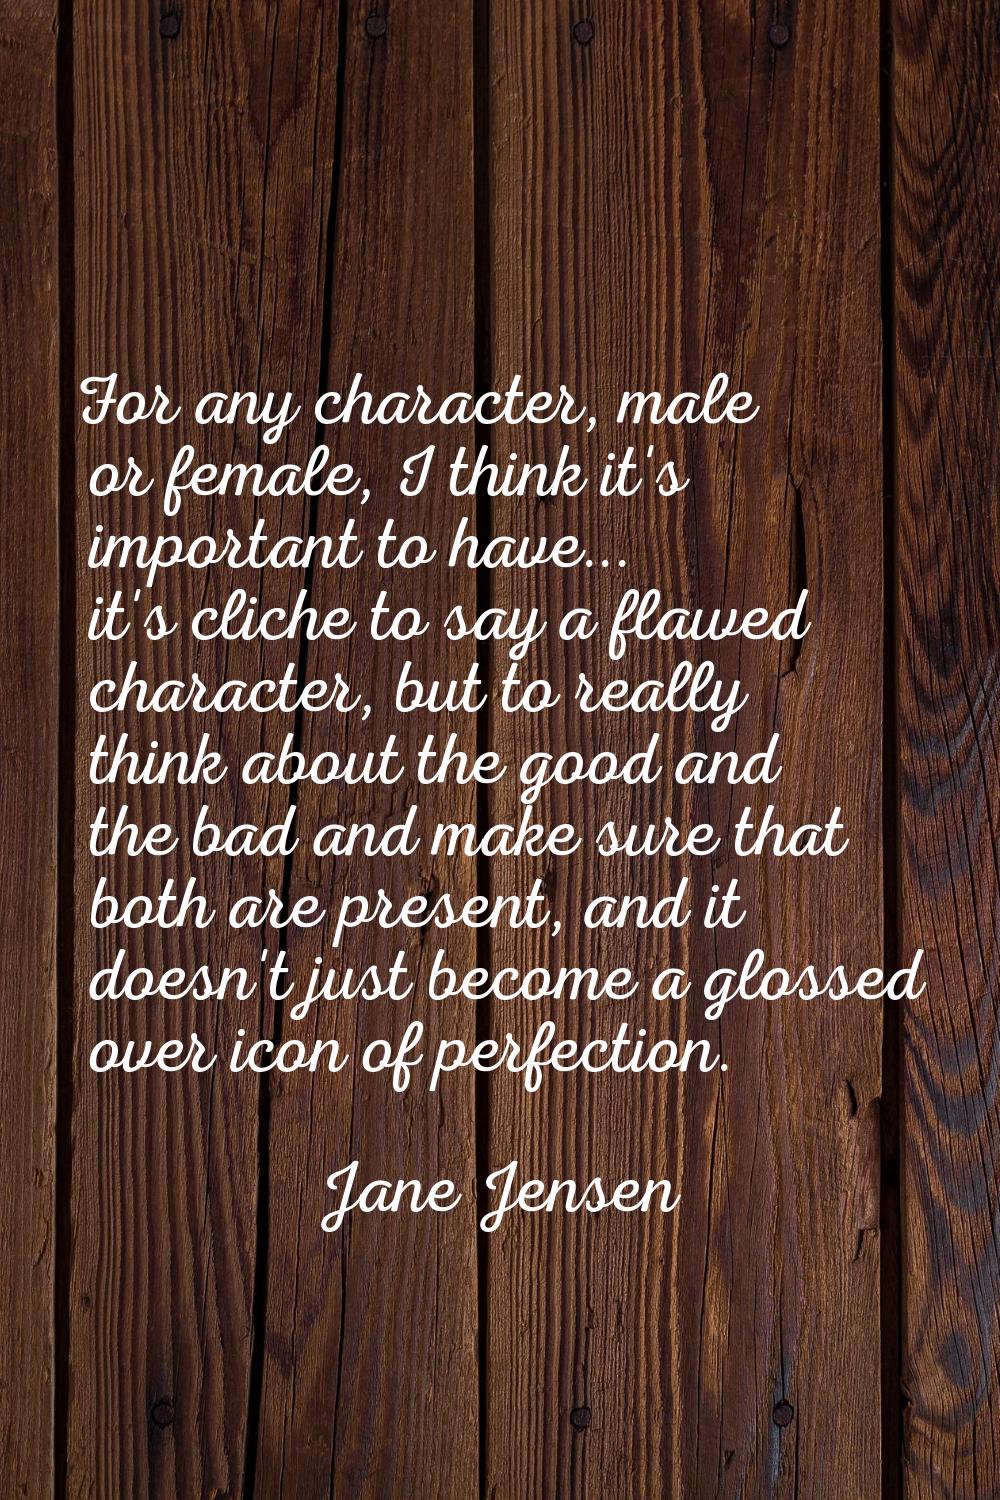 For any character, male or female, I think it's important to have... it's cliche to say a flawed ch